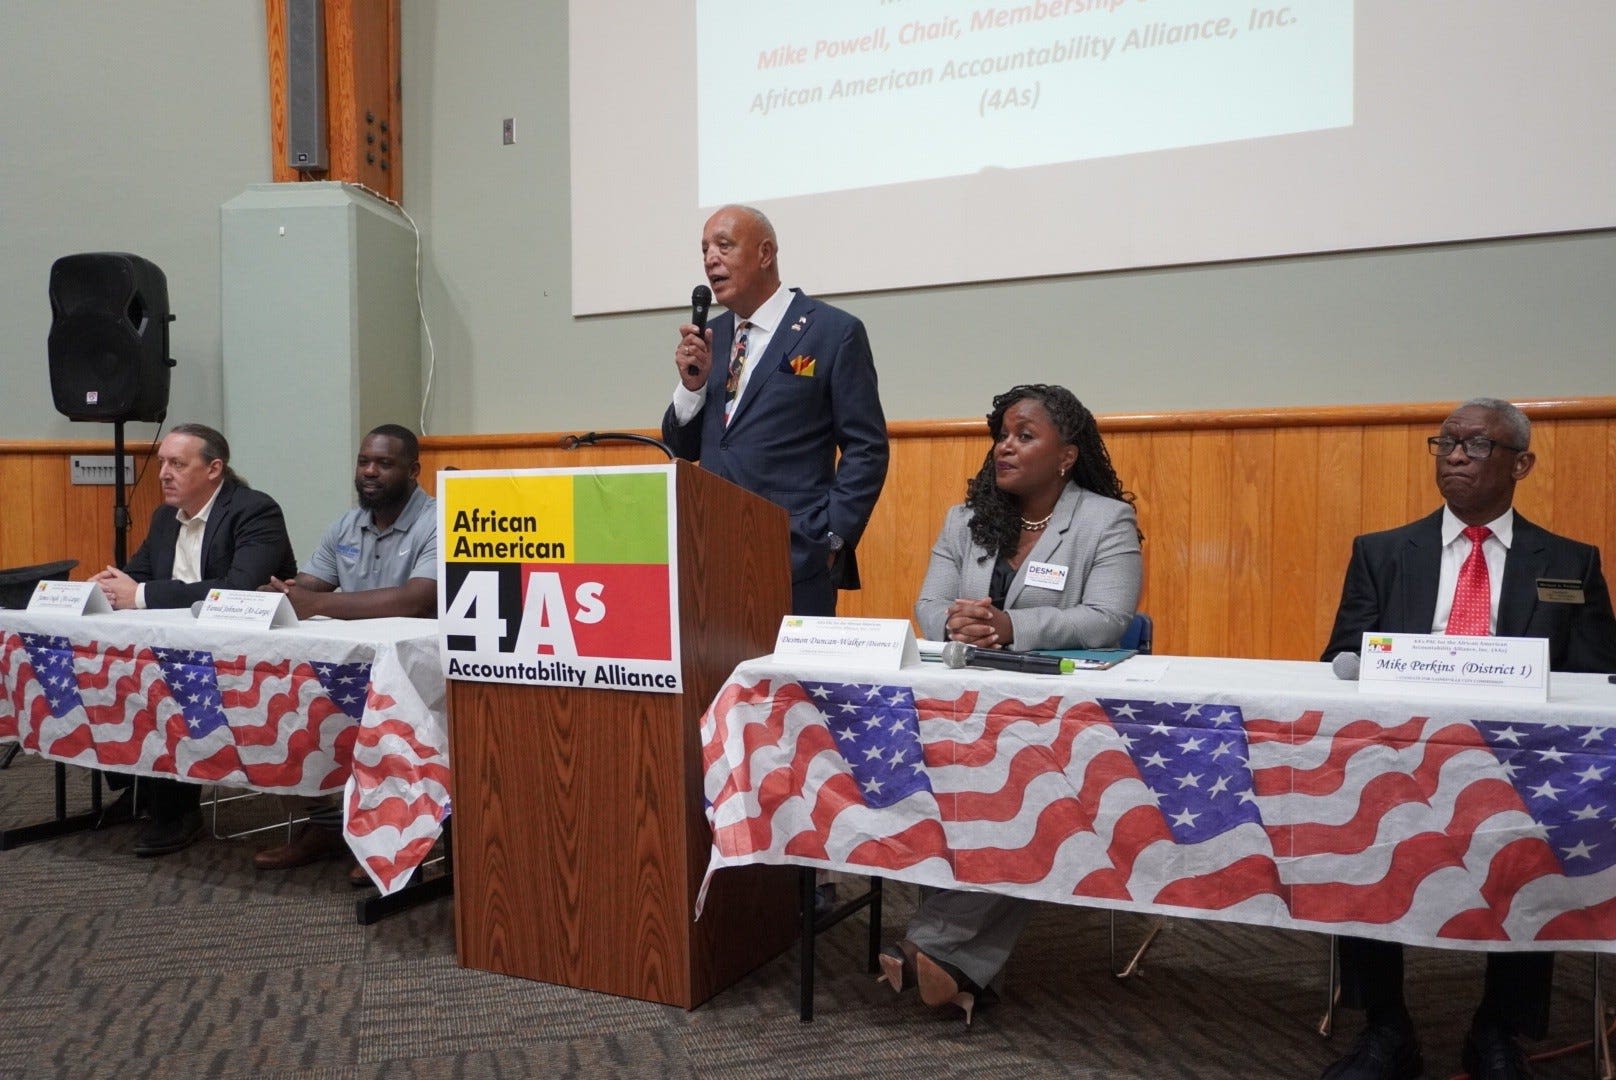 Black organization's PAC endorses candidates in local primary election races